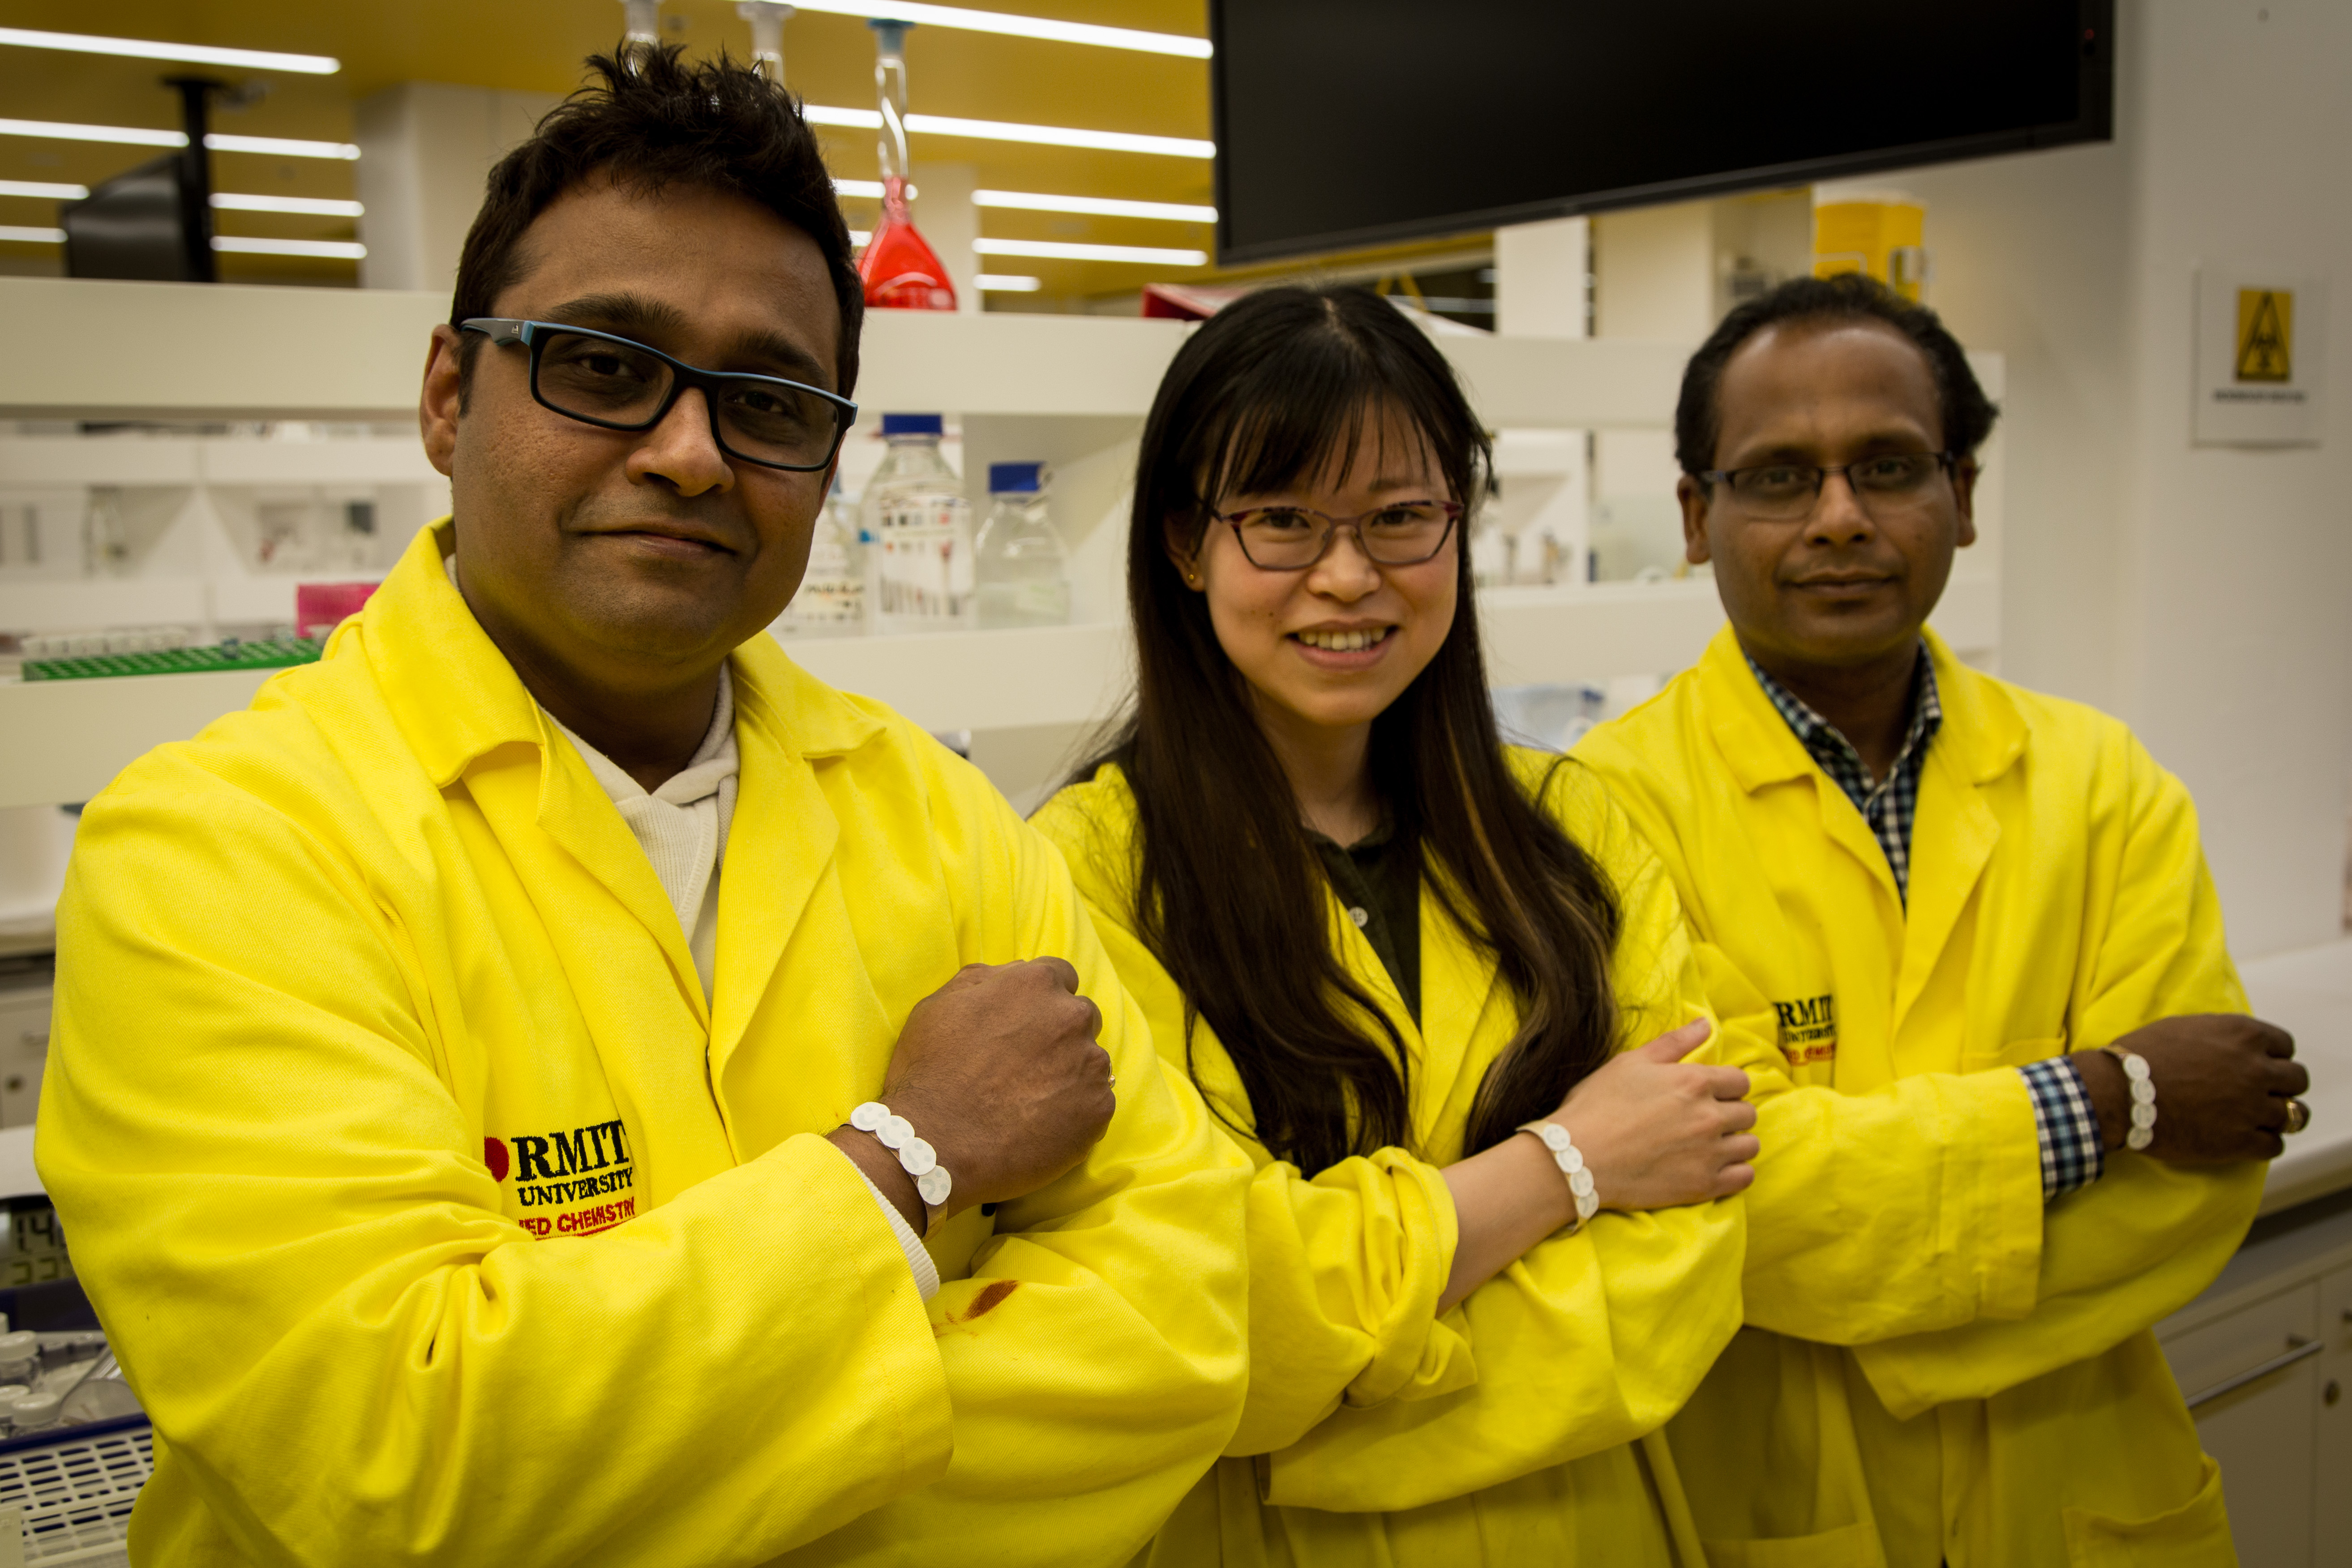 RMIT researchers from the Ian Potter NanoBioSensing Facility wearing prototypes of their UV sensor, from left to right, Dr Rajesh Ramanthan, PhD candidate Wenyue Zou and Professor Vipul Bansal.